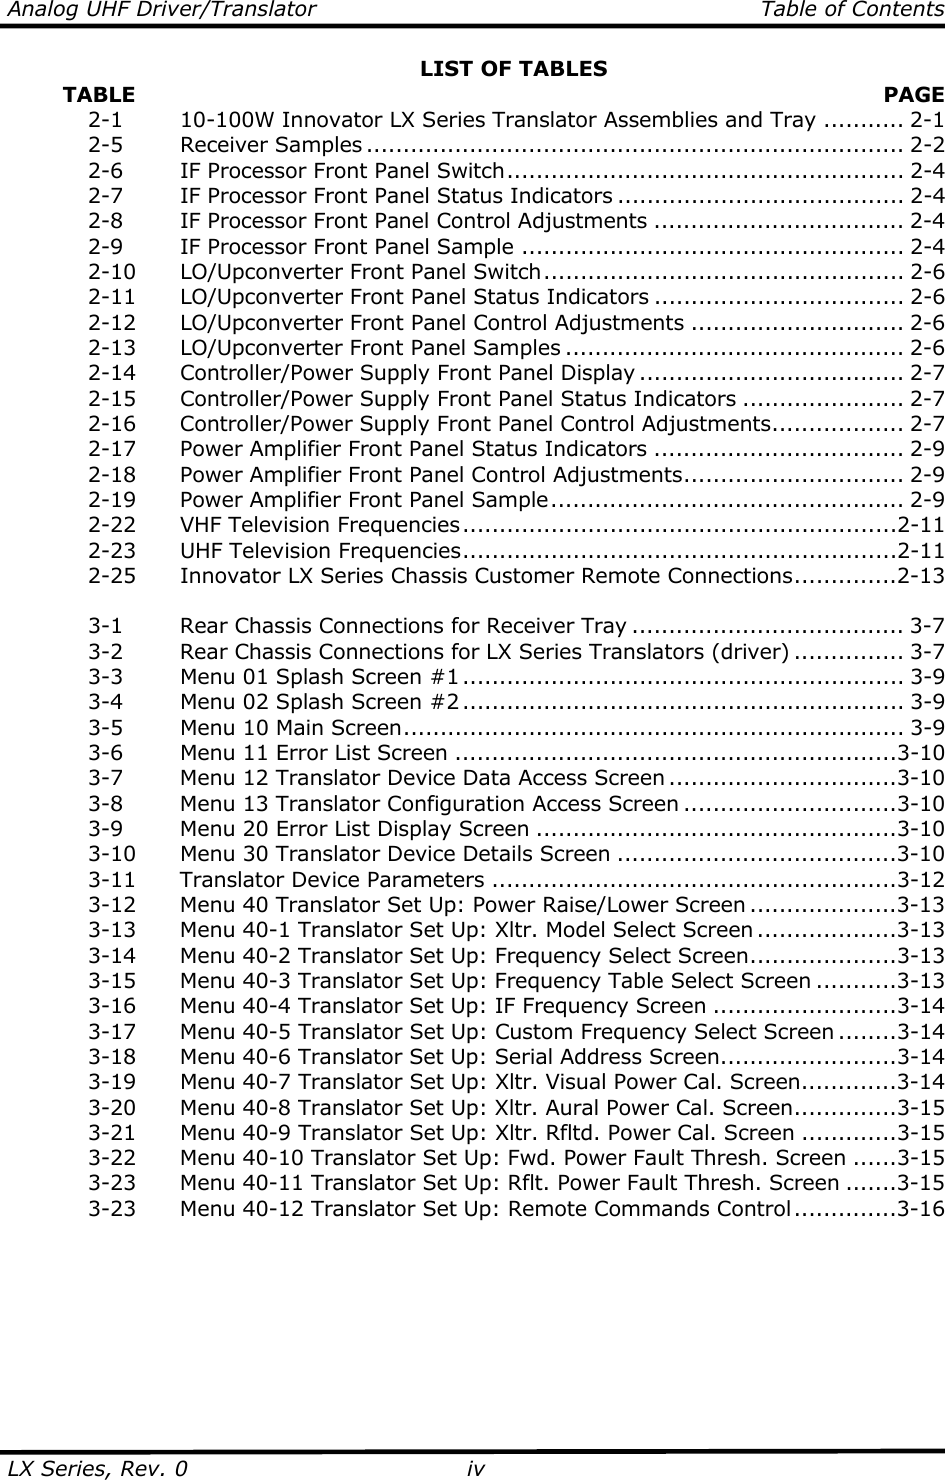 Analog UHF Driver/Translator   Table of Contents  LX Series, Rev. 0  ivLIST OF TABLES         TABLE   PAGE   2-1    10-100W Innovator LX Series Translator Assemblies and Tray ........... 2-1  2-5  Receiver Samples ......................................................................... 2-2   2-6    IF Processor Front Panel Switch...................................................... 2-4   2-7    IF Processor Front Panel Status Indicators ....................................... 2-4   2-8    IF Processor Front Panel Control Adjustments .................................. 2-4   2-9    IF Processor Front Panel Sample .................................................... 2-4   2-10  LO/Upconverter Front Panel Switch................................................. 2-6   2-11  LO/Upconverter Front Panel Status Indicators .................................. 2-6   2-12  LO/Upconverter Front Panel Control Adjustments ............................. 2-6  2-13 LO/Upconverter Front Panel Samples .............................................. 2-6   2-14  Controller/Power Supply Front Panel Display .................................... 2-7   2-15  Controller/Power Supply Front Panel Status Indicators ...................... 2-7   2-16  Controller/Power Supply Front Panel Control Adjustments.................. 2-7   2-17  Power Amplifier Front Panel Status Indicators .................................. 2-9   2-18  Power Amplifier Front Panel Control Adjustments.............................. 2-9  2-19 Power Amplifier Front Panel Sample................................................ 2-9   2-22  VHF Television Frequencies...........................................................2-11   2-23  UHF Television Frequencies...........................................................2-11   2-25  Innovator LX Series Chassis Customer Remote Connections..............2-13     3-1    Rear Chassis Connections for Receiver Tray ..................................... 3-7   3-2    Rear Chassis Connections for LX Series Translators (driver) ............... 3-7   3-3    Menu 01 Splash Screen #1 ............................................................ 3-9   3-4    Menu 02 Splash Screen #2 ............................................................ 3-9   3-5    Menu 10 Main Screen.................................................................... 3-9   3-6    Menu 11 Error List Screen ............................................................3-10   3-7    Menu 12 Translator Device Data Access Screen ...............................3-10   3-8    Menu 13 Translator Configuration Access Screen .............................3-10   3-9    Menu 20 Error List Display Screen .................................................3-10   3-10  Menu 30 Translator Device Details Screen ......................................3-10  3-11 Translator Device Parameters .......................................................3-12   3-12  Menu 40 Translator Set Up: Power Raise/Lower Screen ....................3-13   3-13  Menu 40-1 Translator Set Up: Xltr. Model Select Screen ...................3-13   3-14  Menu 40-2 Translator Set Up: Frequency Select Screen....................3-13   3-15  Menu 40-3 Translator Set Up: Frequency Table Select Screen ...........3-13   3-16  Menu 40-4 Translator Set Up: IF Frequency Screen .........................3-14   3-17  Menu 40-5 Translator Set Up: Custom Frequency Select Screen ........3-14   3-18  Menu 40-6 Translator Set Up: Serial Address Screen........................3-14   3-19  Menu 40-7 Translator Set Up: Xltr. Visual Power Cal. Screen.............3-14   3-20  Menu 40-8 Translator Set Up: Xltr. Aural Power Cal. Screen..............3-15   3-21  Menu 40-9 Translator Set Up: Xltr. Rfltd. Power Cal. Screen .............3-15   3-22  Menu 40-10 Translator Set Up: Fwd. Power Fault Thresh. Screen ......3-15   3-23  Menu 40-11 Translator Set Up: Rflt. Power Fault Thresh. Screen .......3-15   3-23  Menu 40-12 Translator Set Up: Remote Commands Control..............3-16       